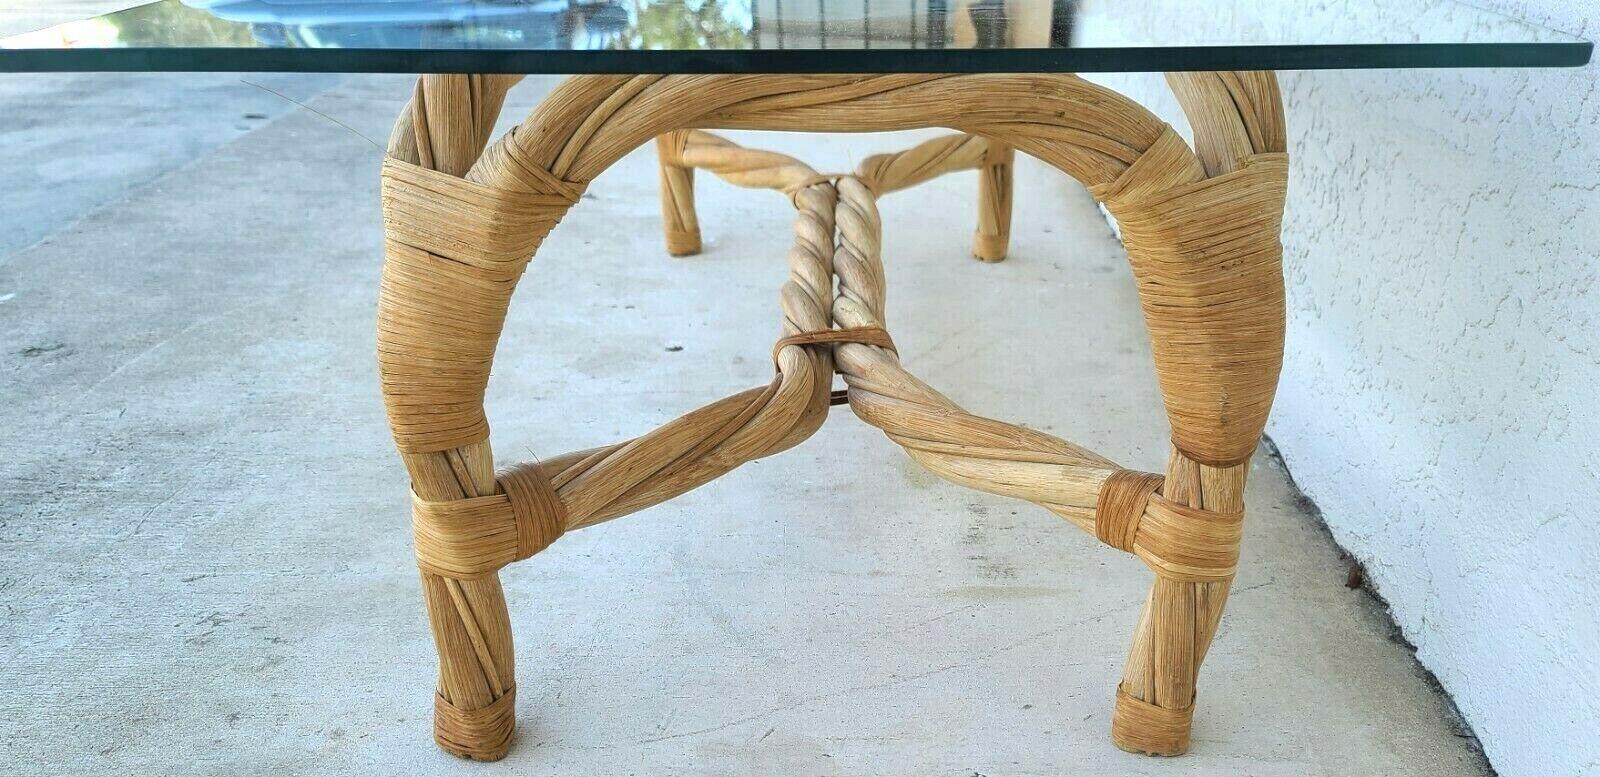 Coastal Boho Twisted Bamboo & Rattan Glass Coffee Table In Good Condition For Sale In Lake Worth, FL